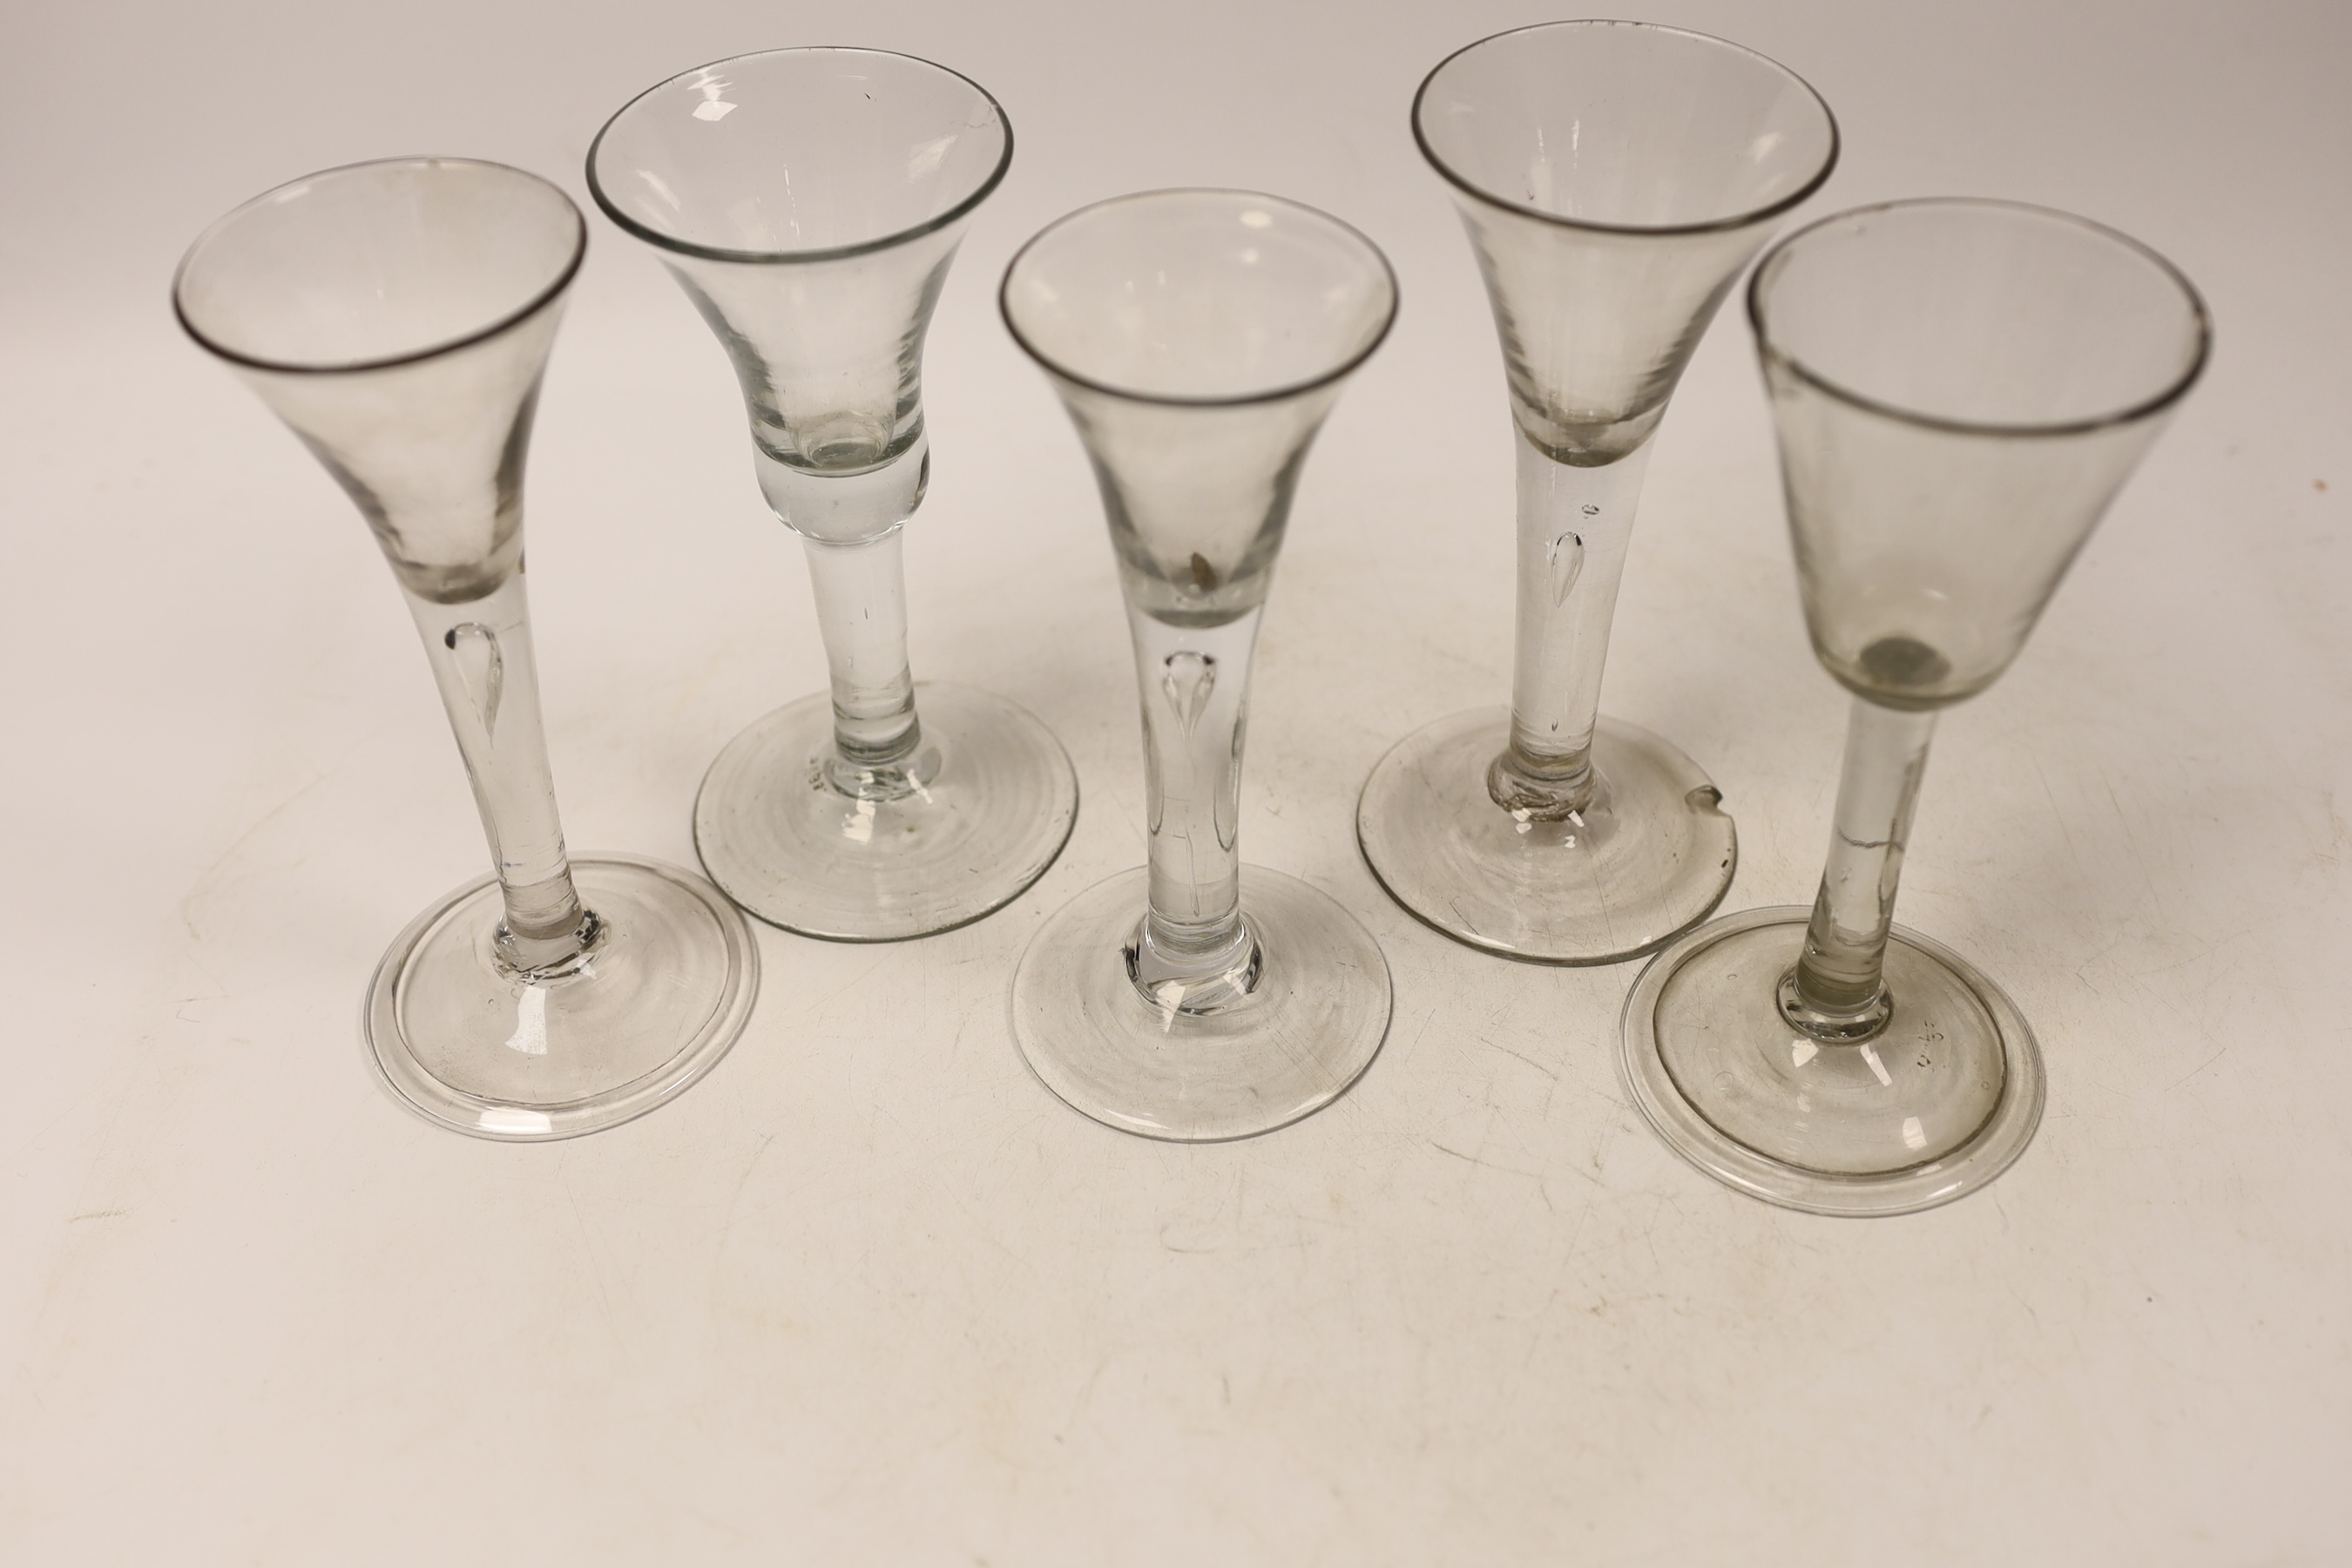 Five mid-18th century plain stem wine glasses, including three with drawn trumpet shaped bowls, two examples with folded feet, tallest 16cm